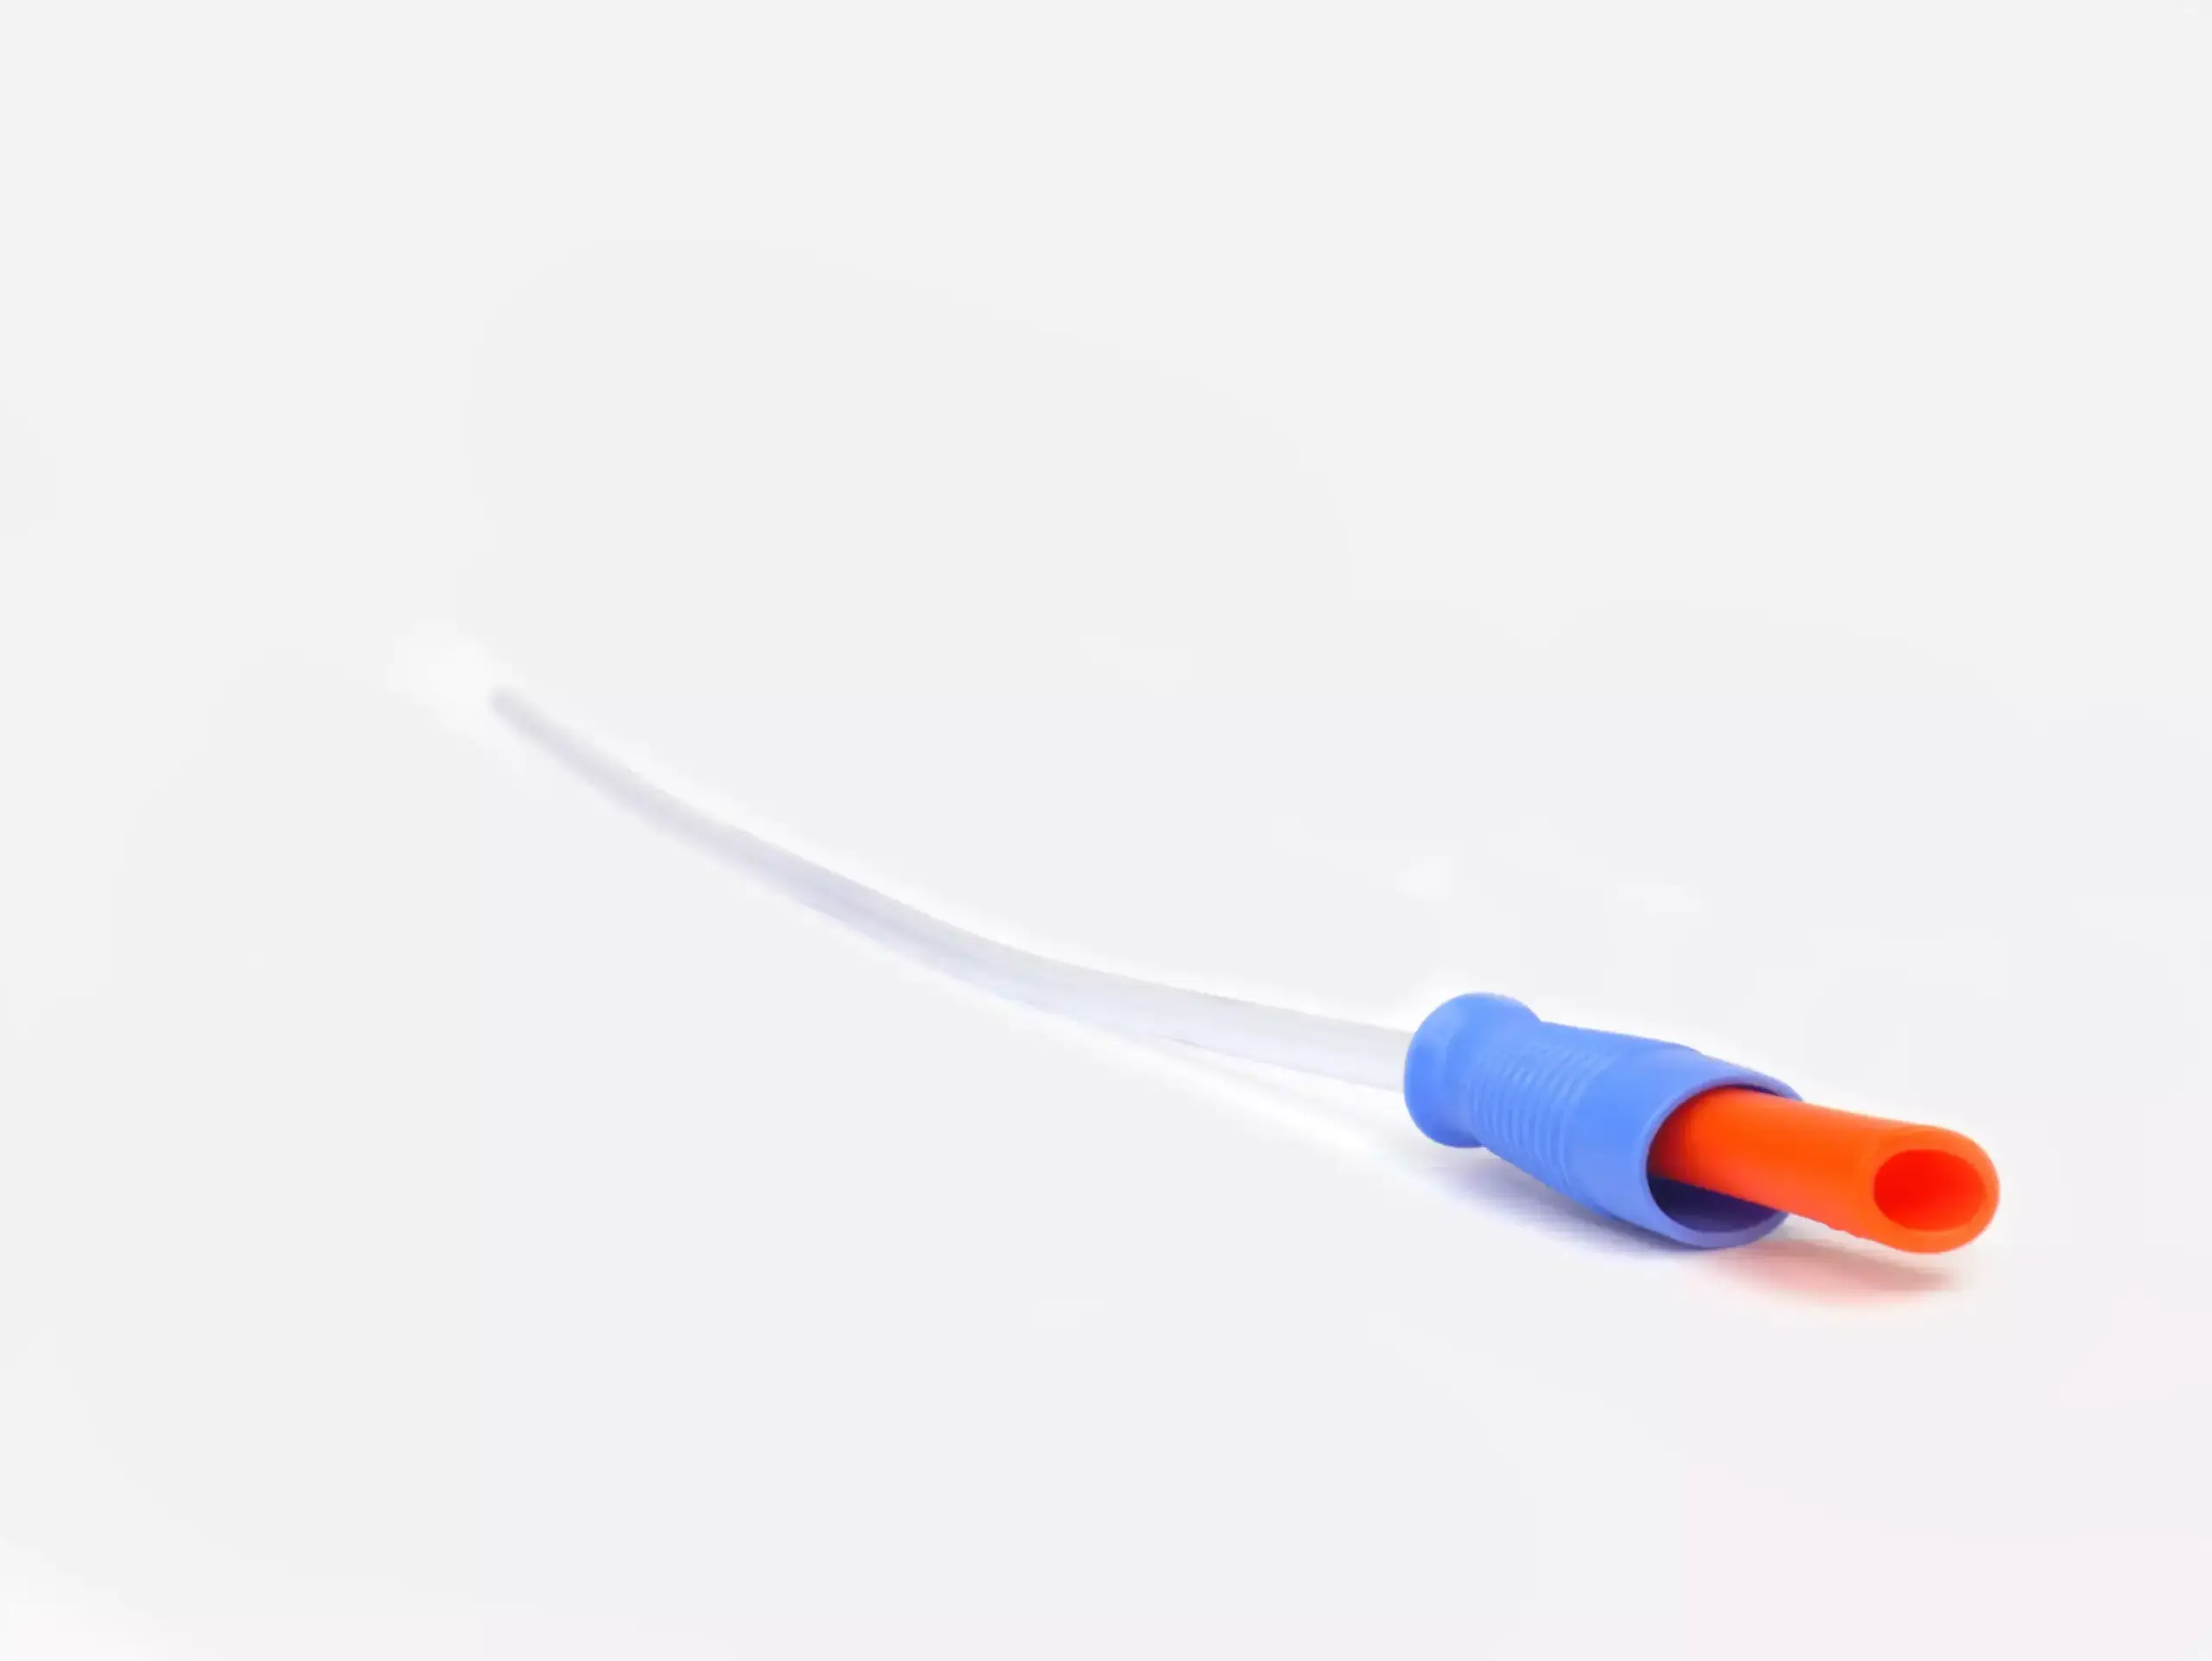 Photograph of a RA Fischer Co. Cure brand catheter with a blue and orange grip, set against a white background. [ Personalized urology care ]